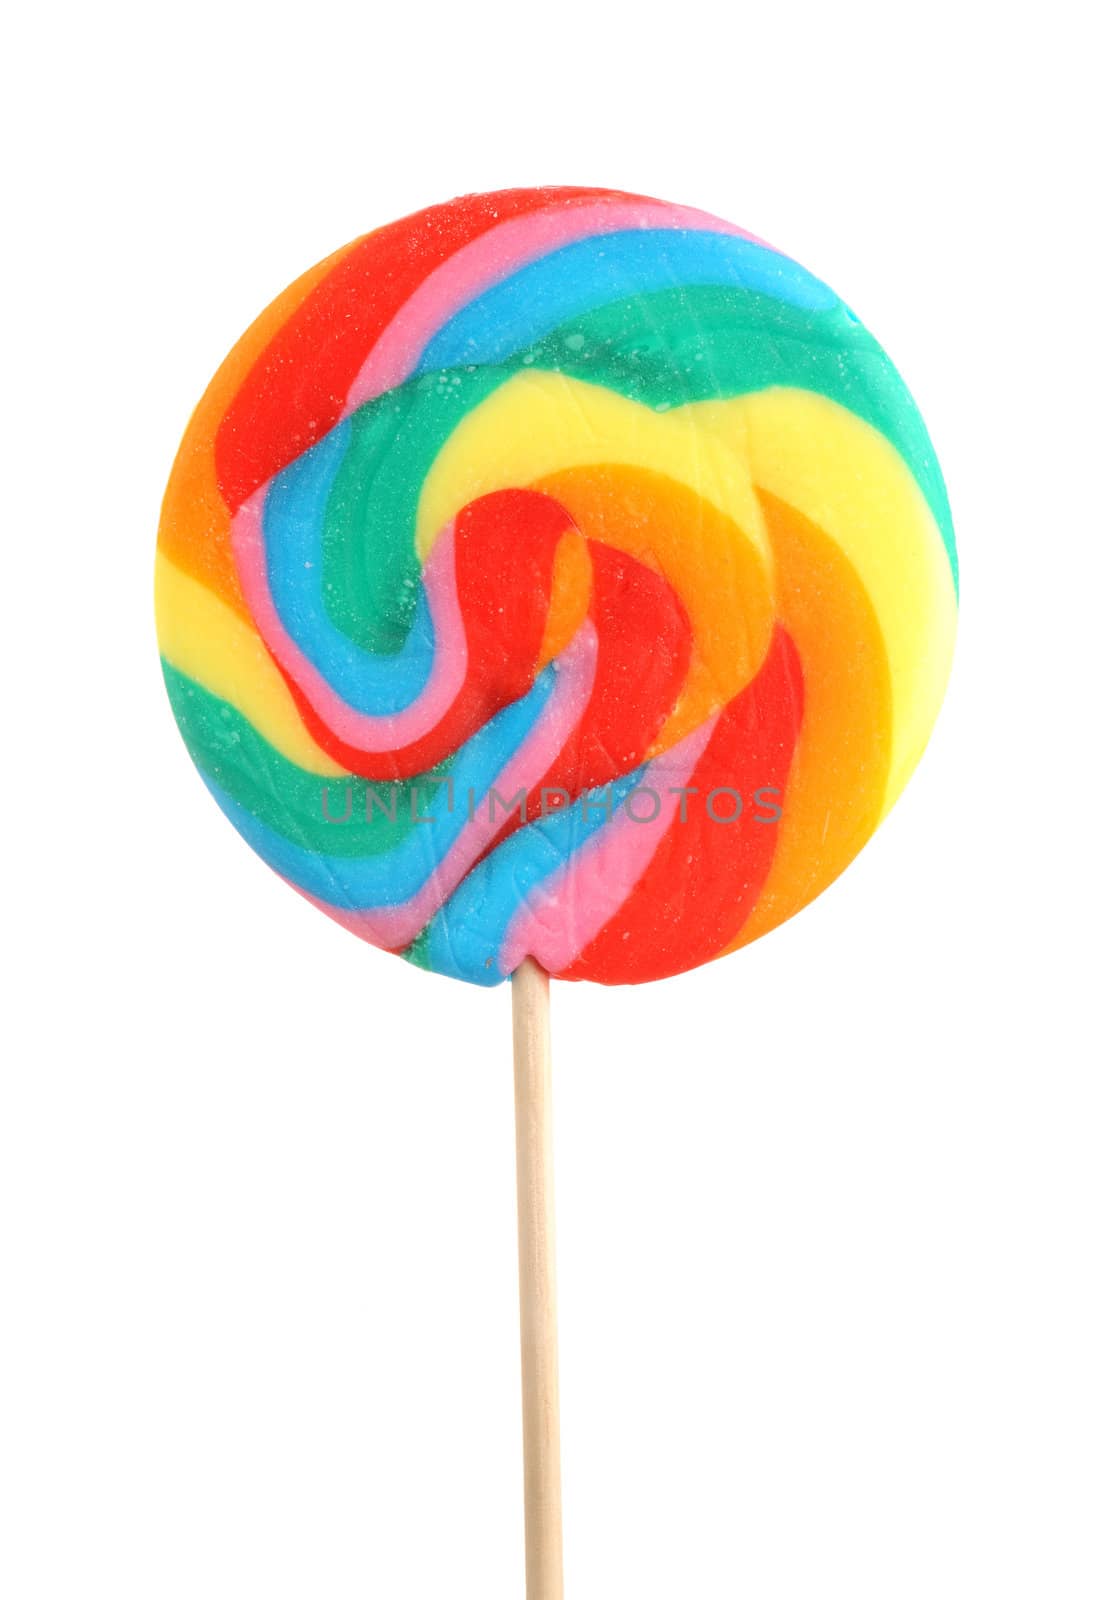  colorful lollipop on a white background.